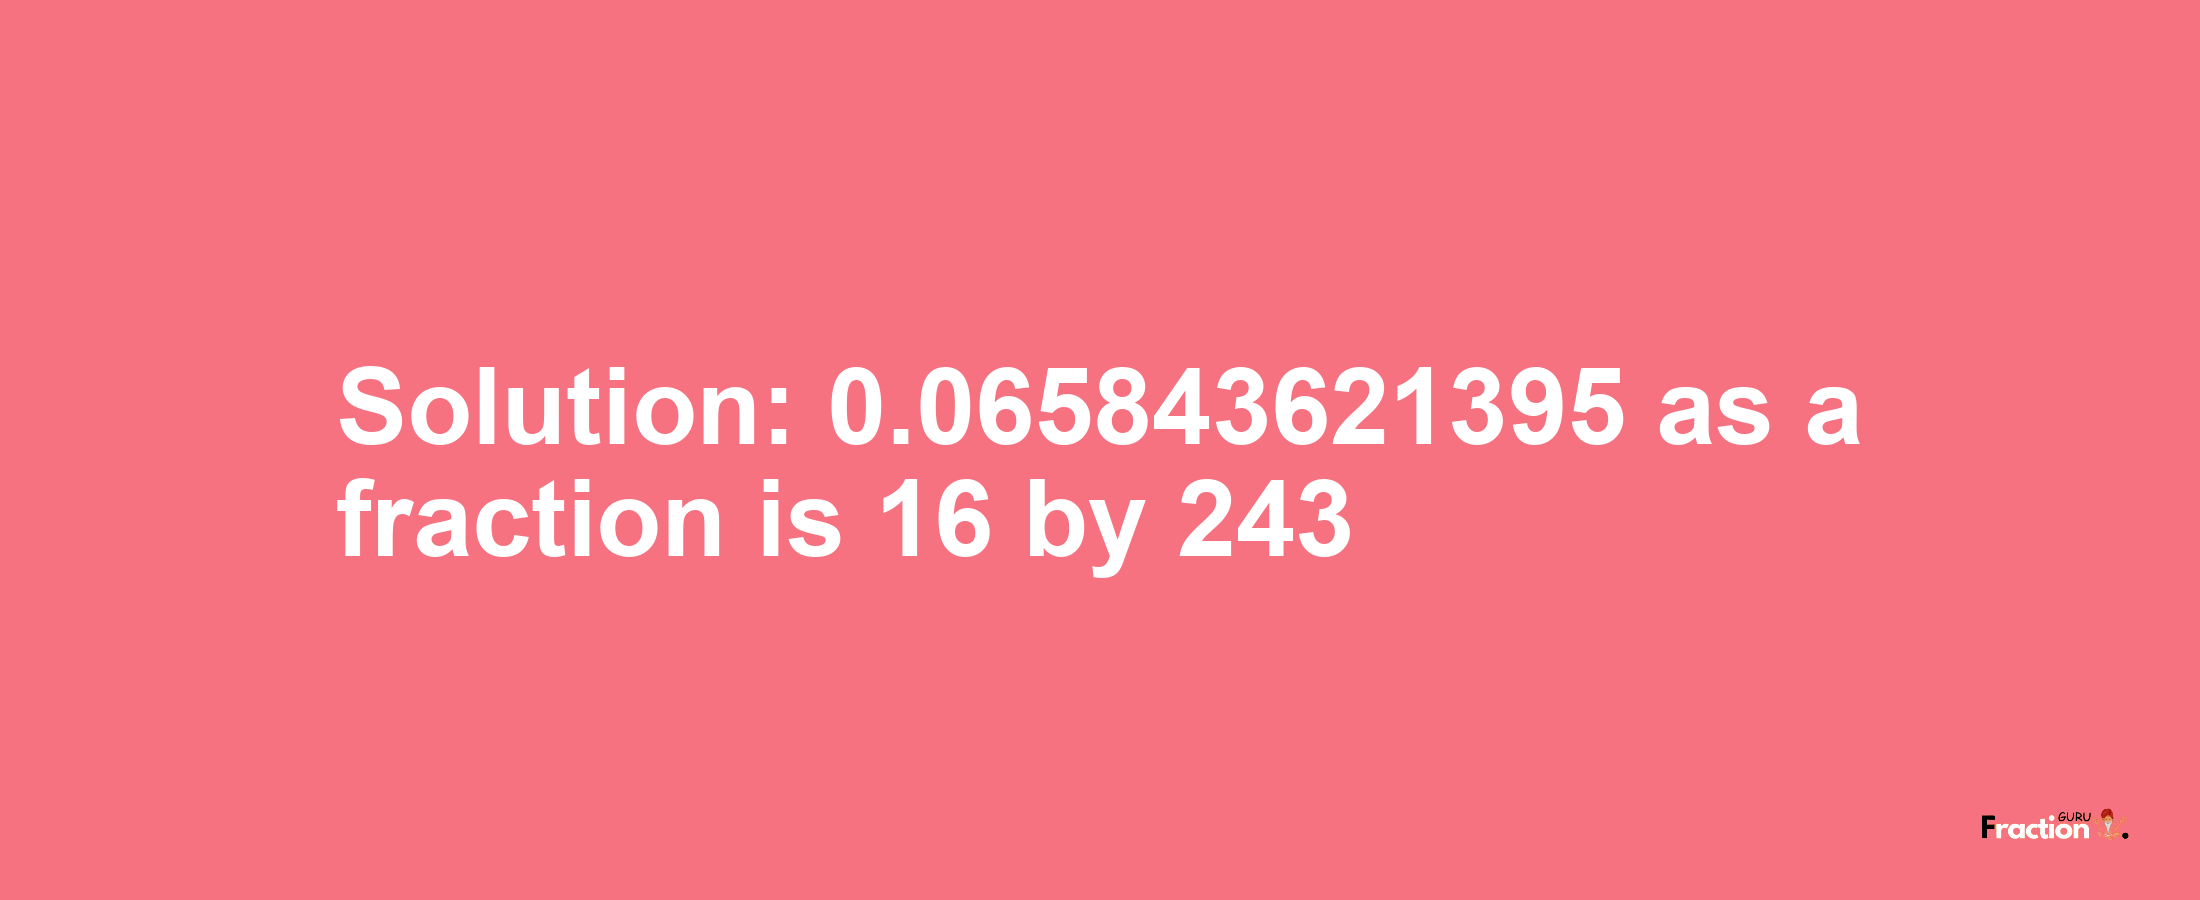 Solution:0.065843621395 as a fraction is 16/243